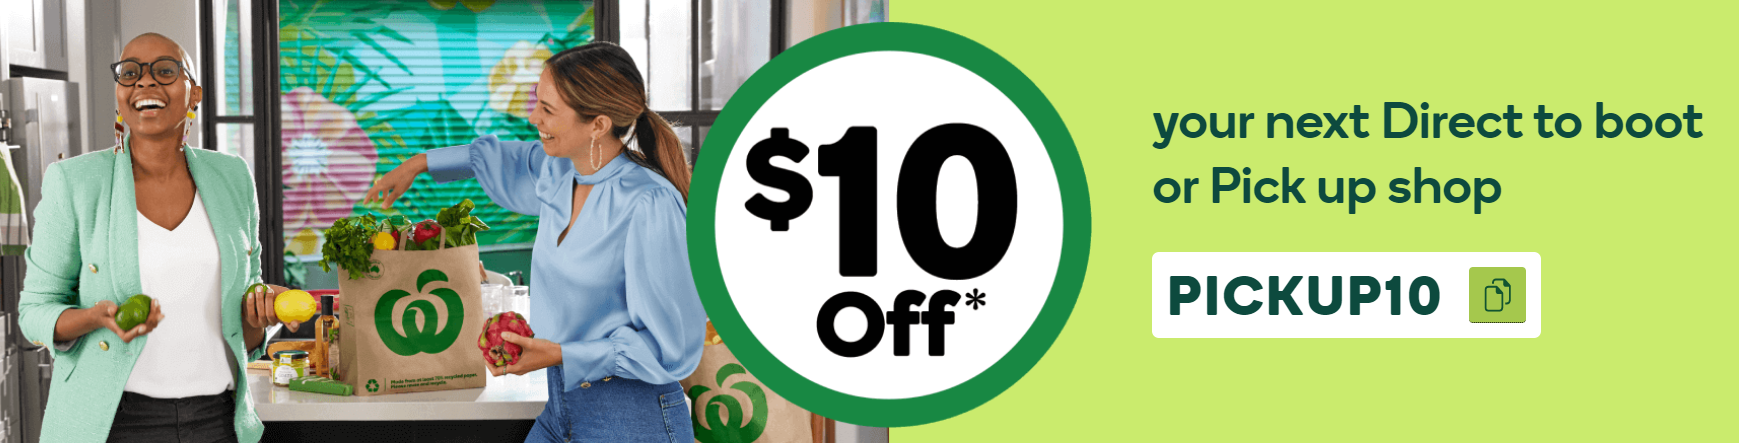 $10 OFF your next Direct to boot or Pick up shop with promo code at Woolworths[min. spend $190]